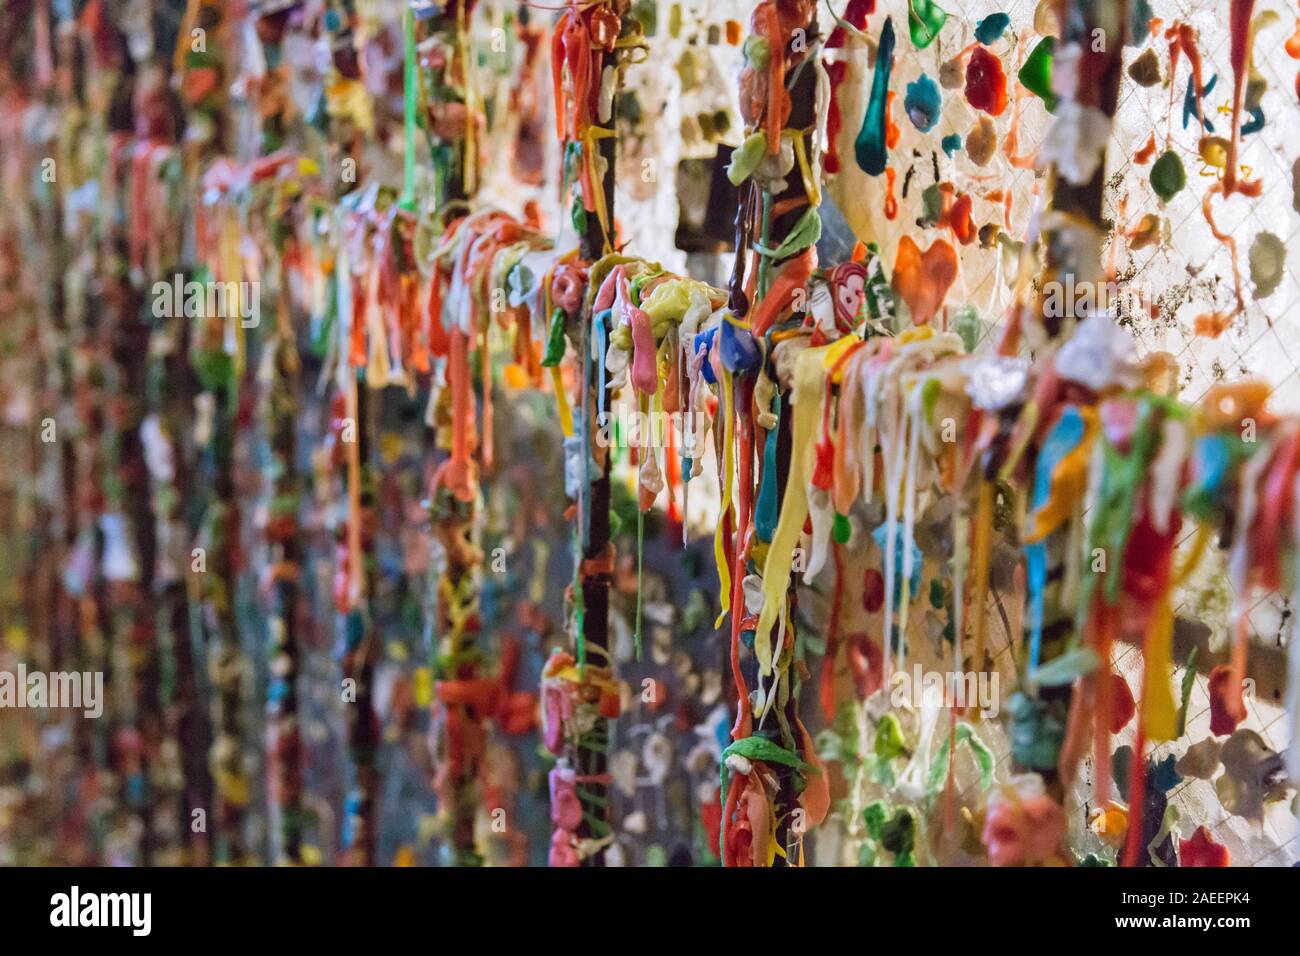 The Gum Wall in Seattle : Numbers of colorful gums are decorated on the side of building structure by visitors, Seattle, Washington, USA. Stock Photo